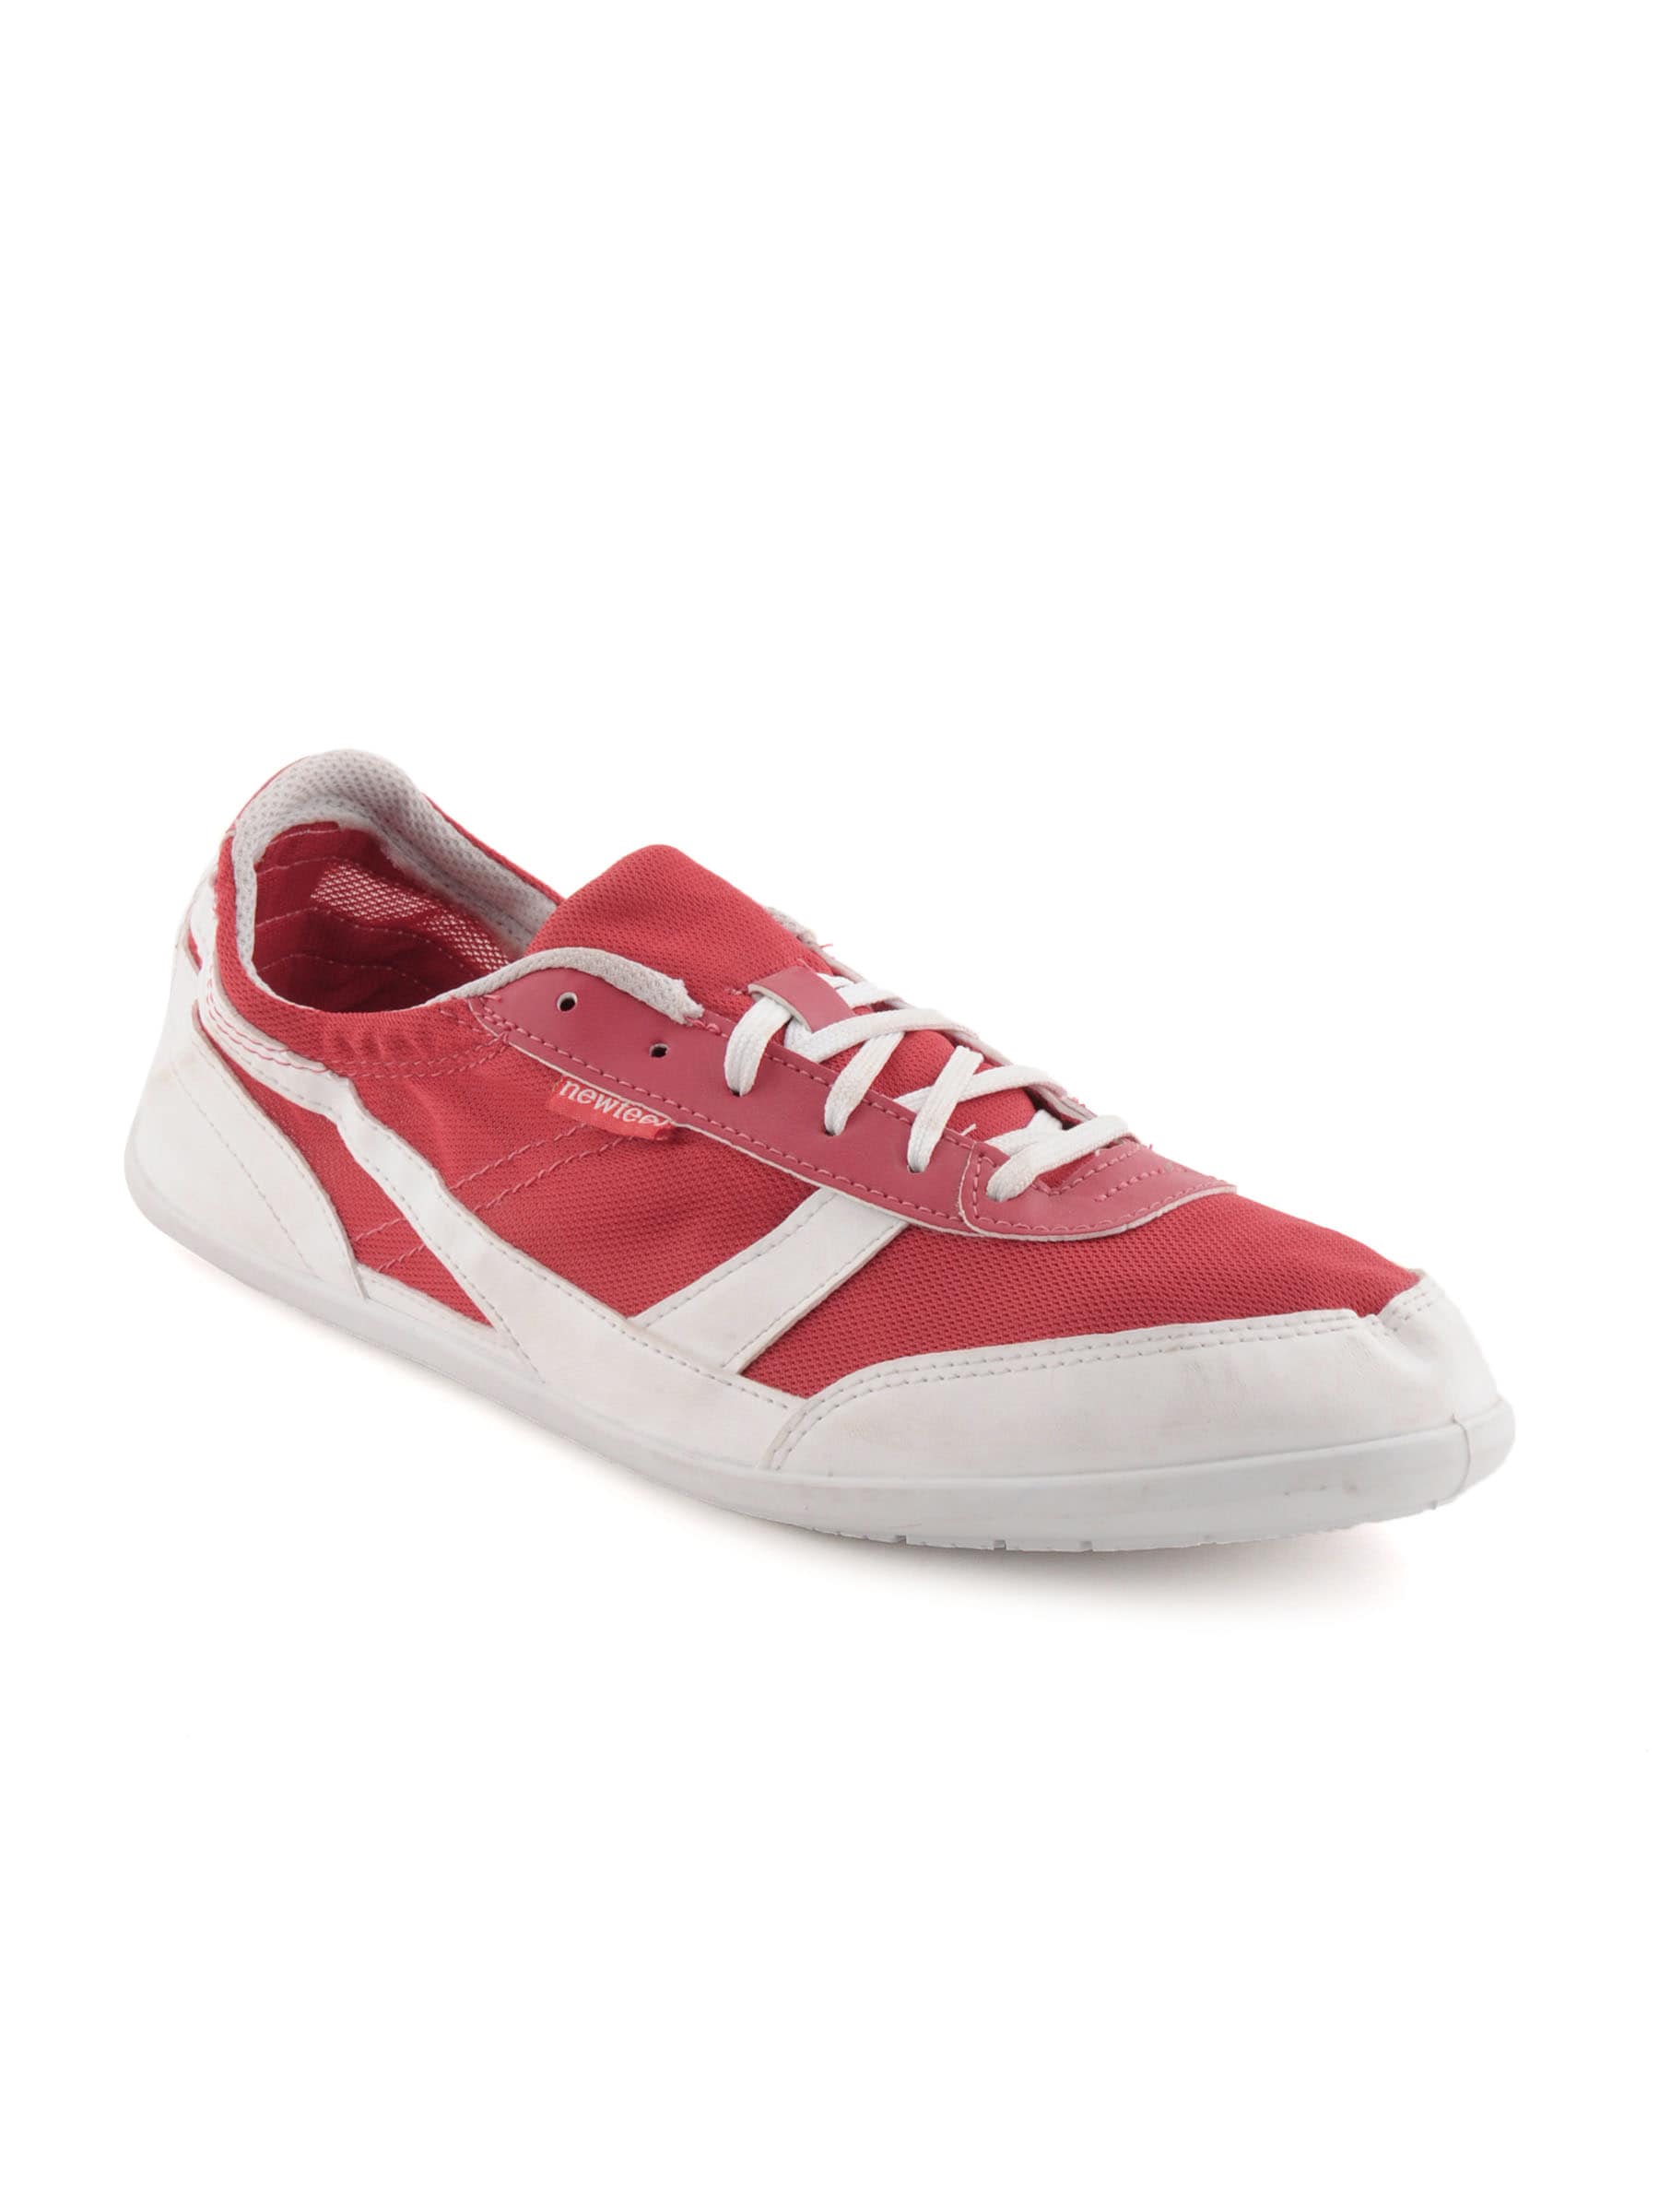 Newfeel Unisex Red Comfy Shoes